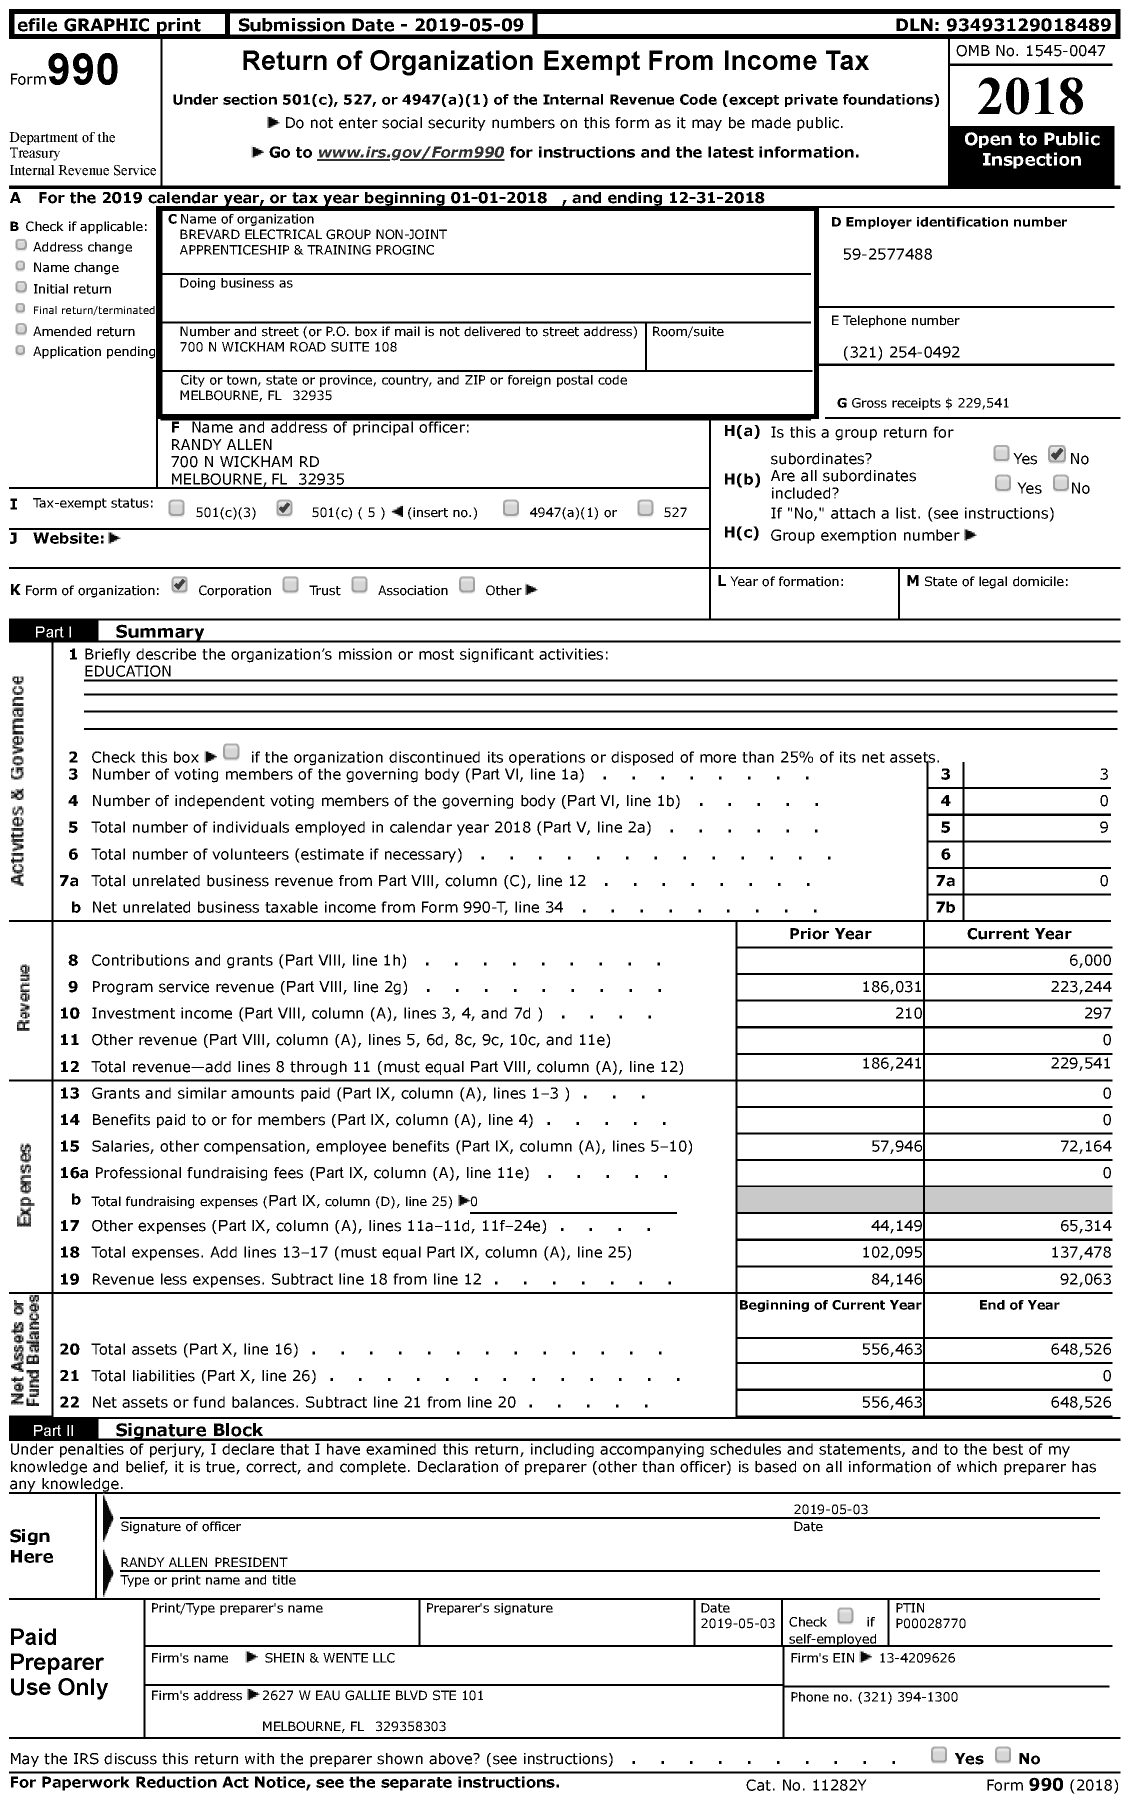 Image of first page of 2018 Form 990 for Brevard Electrical Group Non-Joint Apprenticeship and Training Proginc